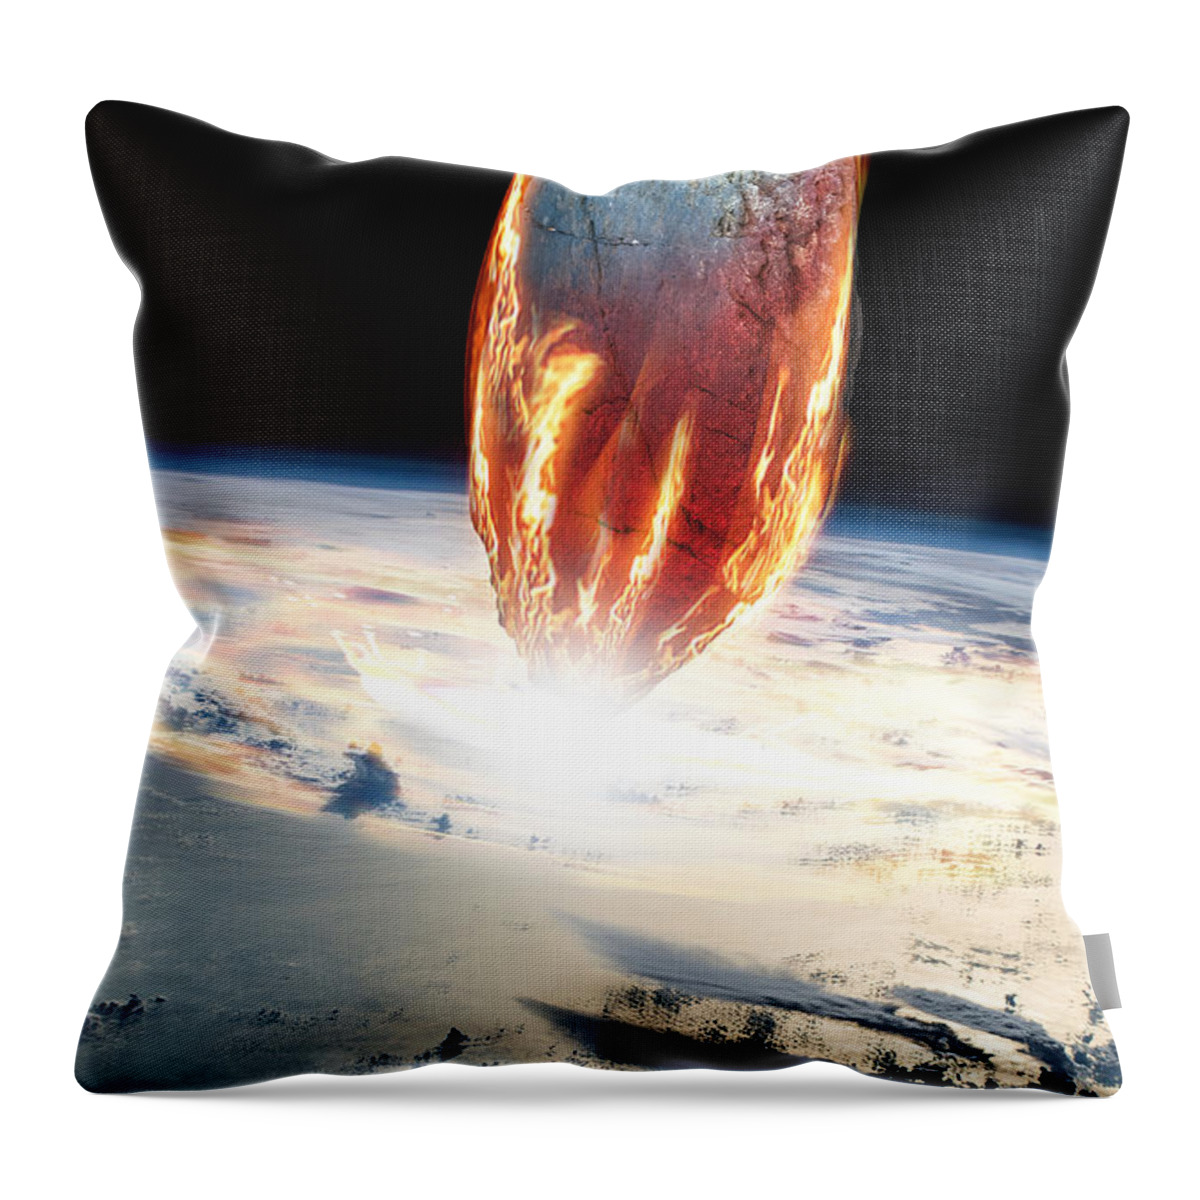 Asteroid Throw Pillow featuring the photograph Asteroid Entering Earths Atmosphere by Marc Ward